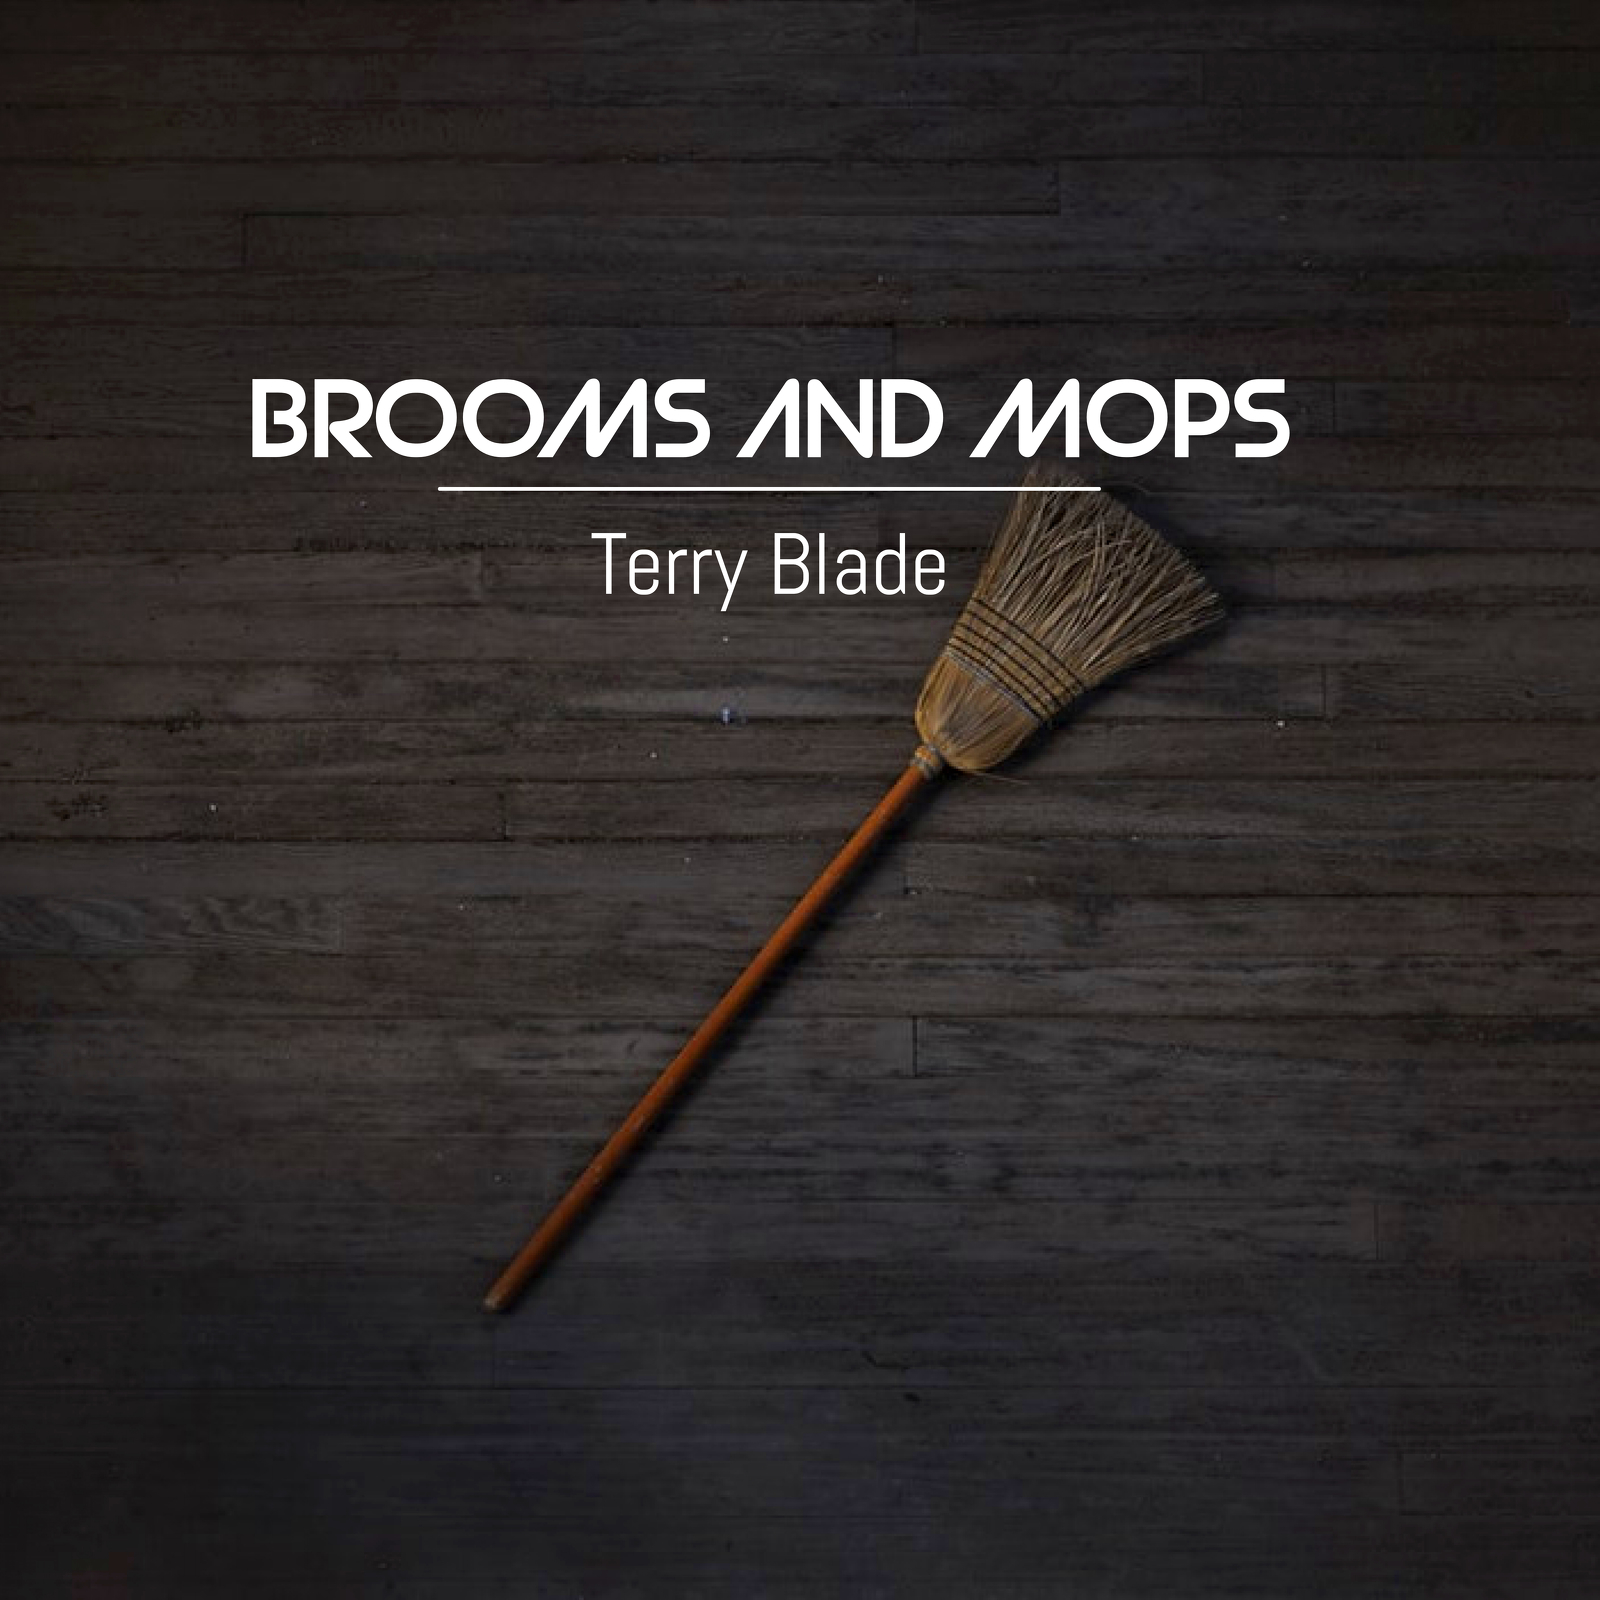 Terry Blade - Brooms and Mops